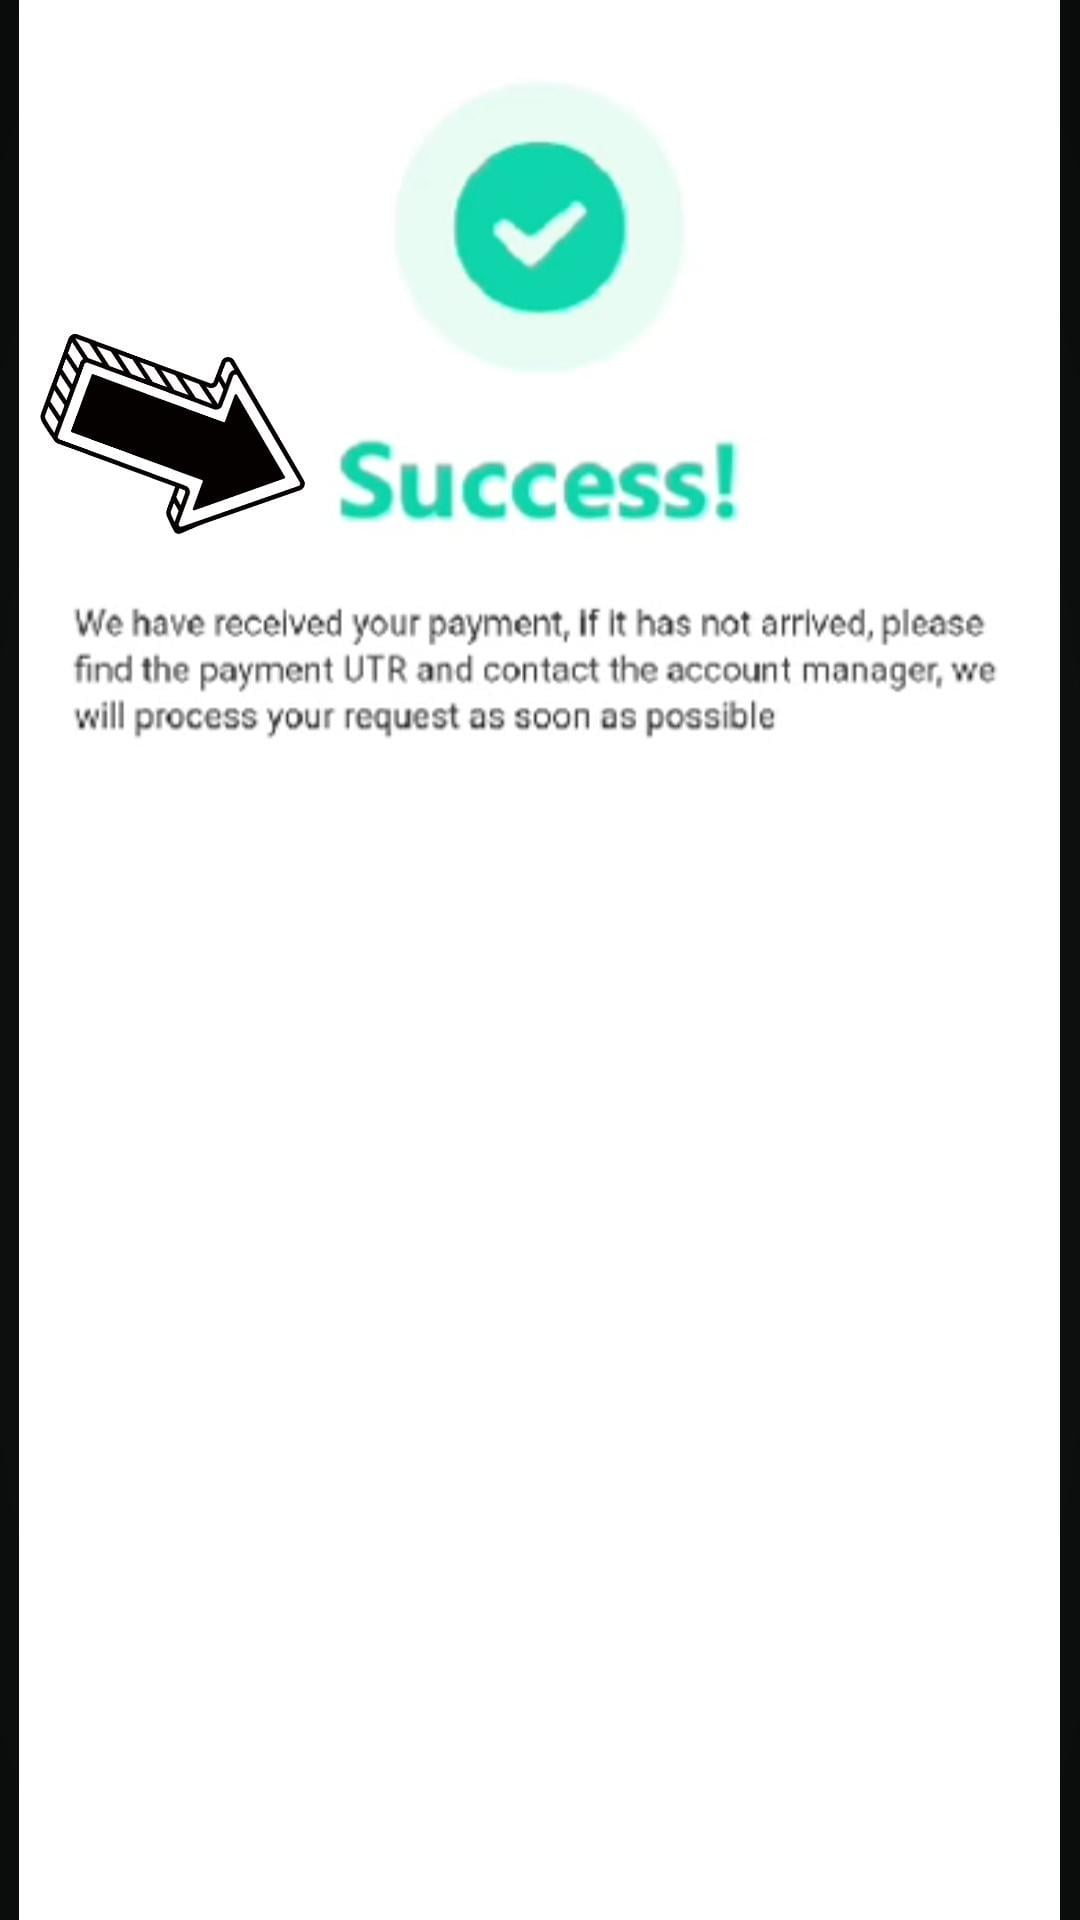 55 Club Payment Successful Done